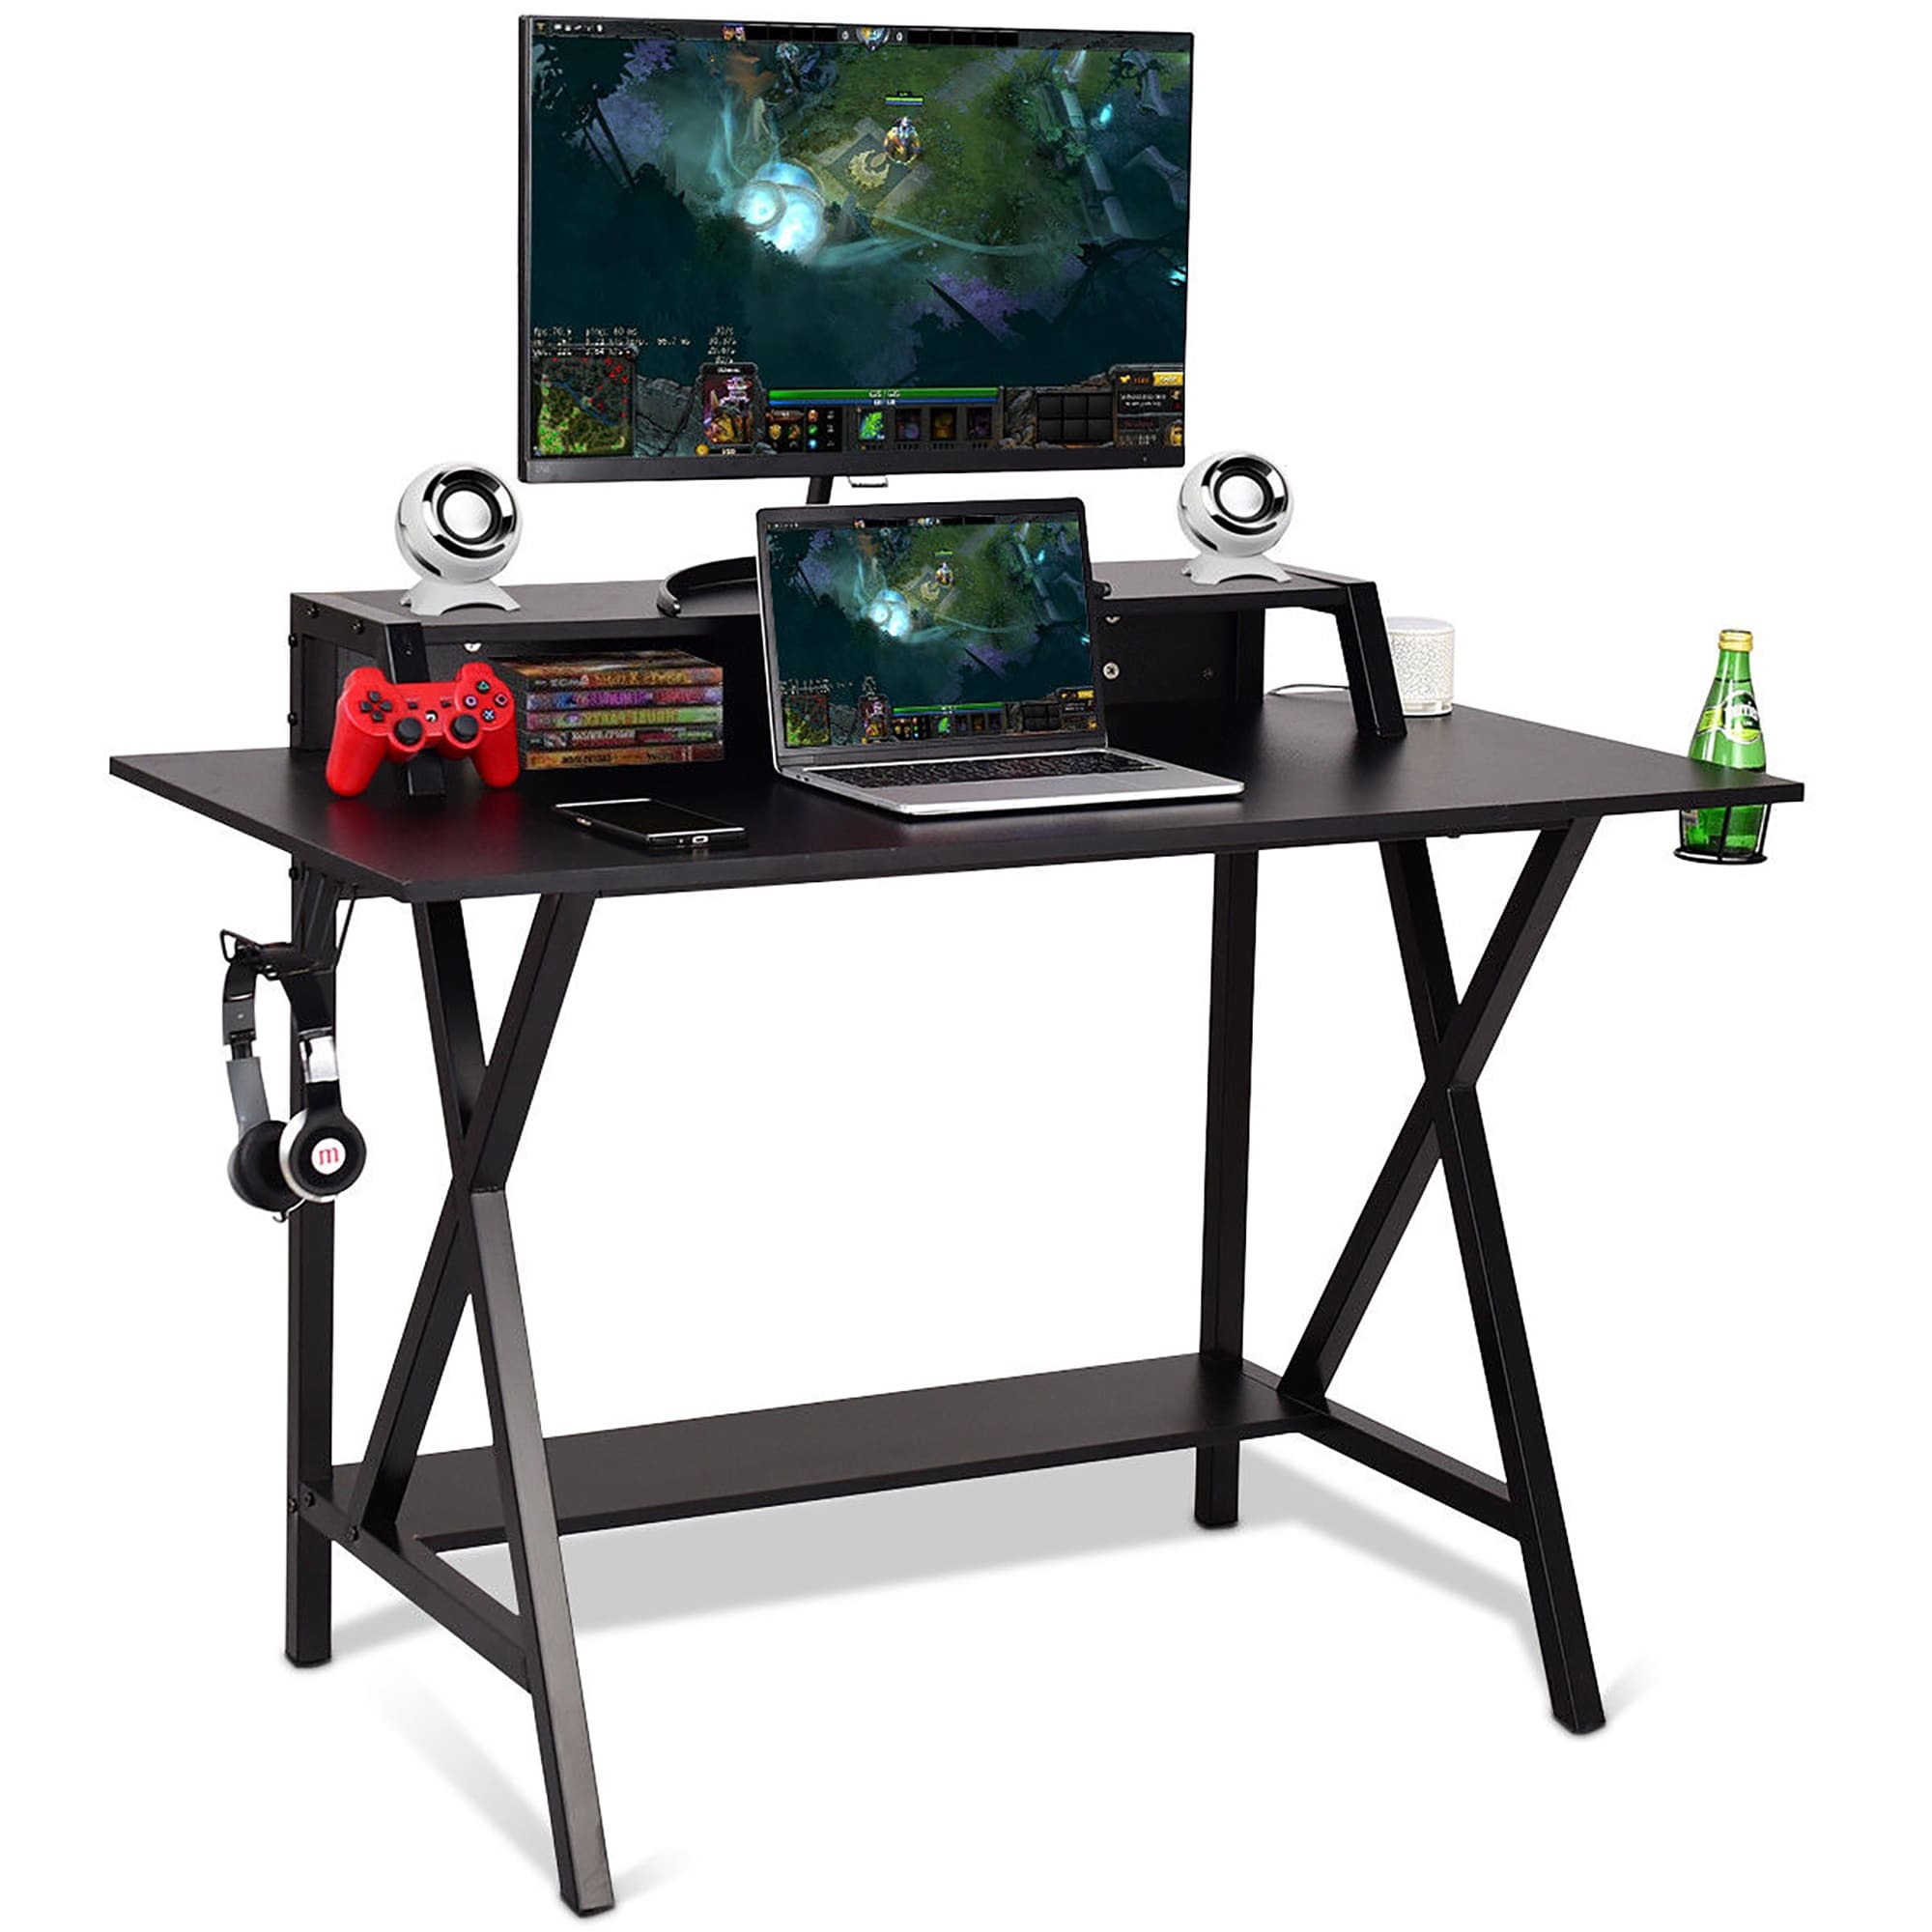 Details about   48" E-sports Computer Desk Gaming Table Racing Style Laptop Home Office BF Gift 